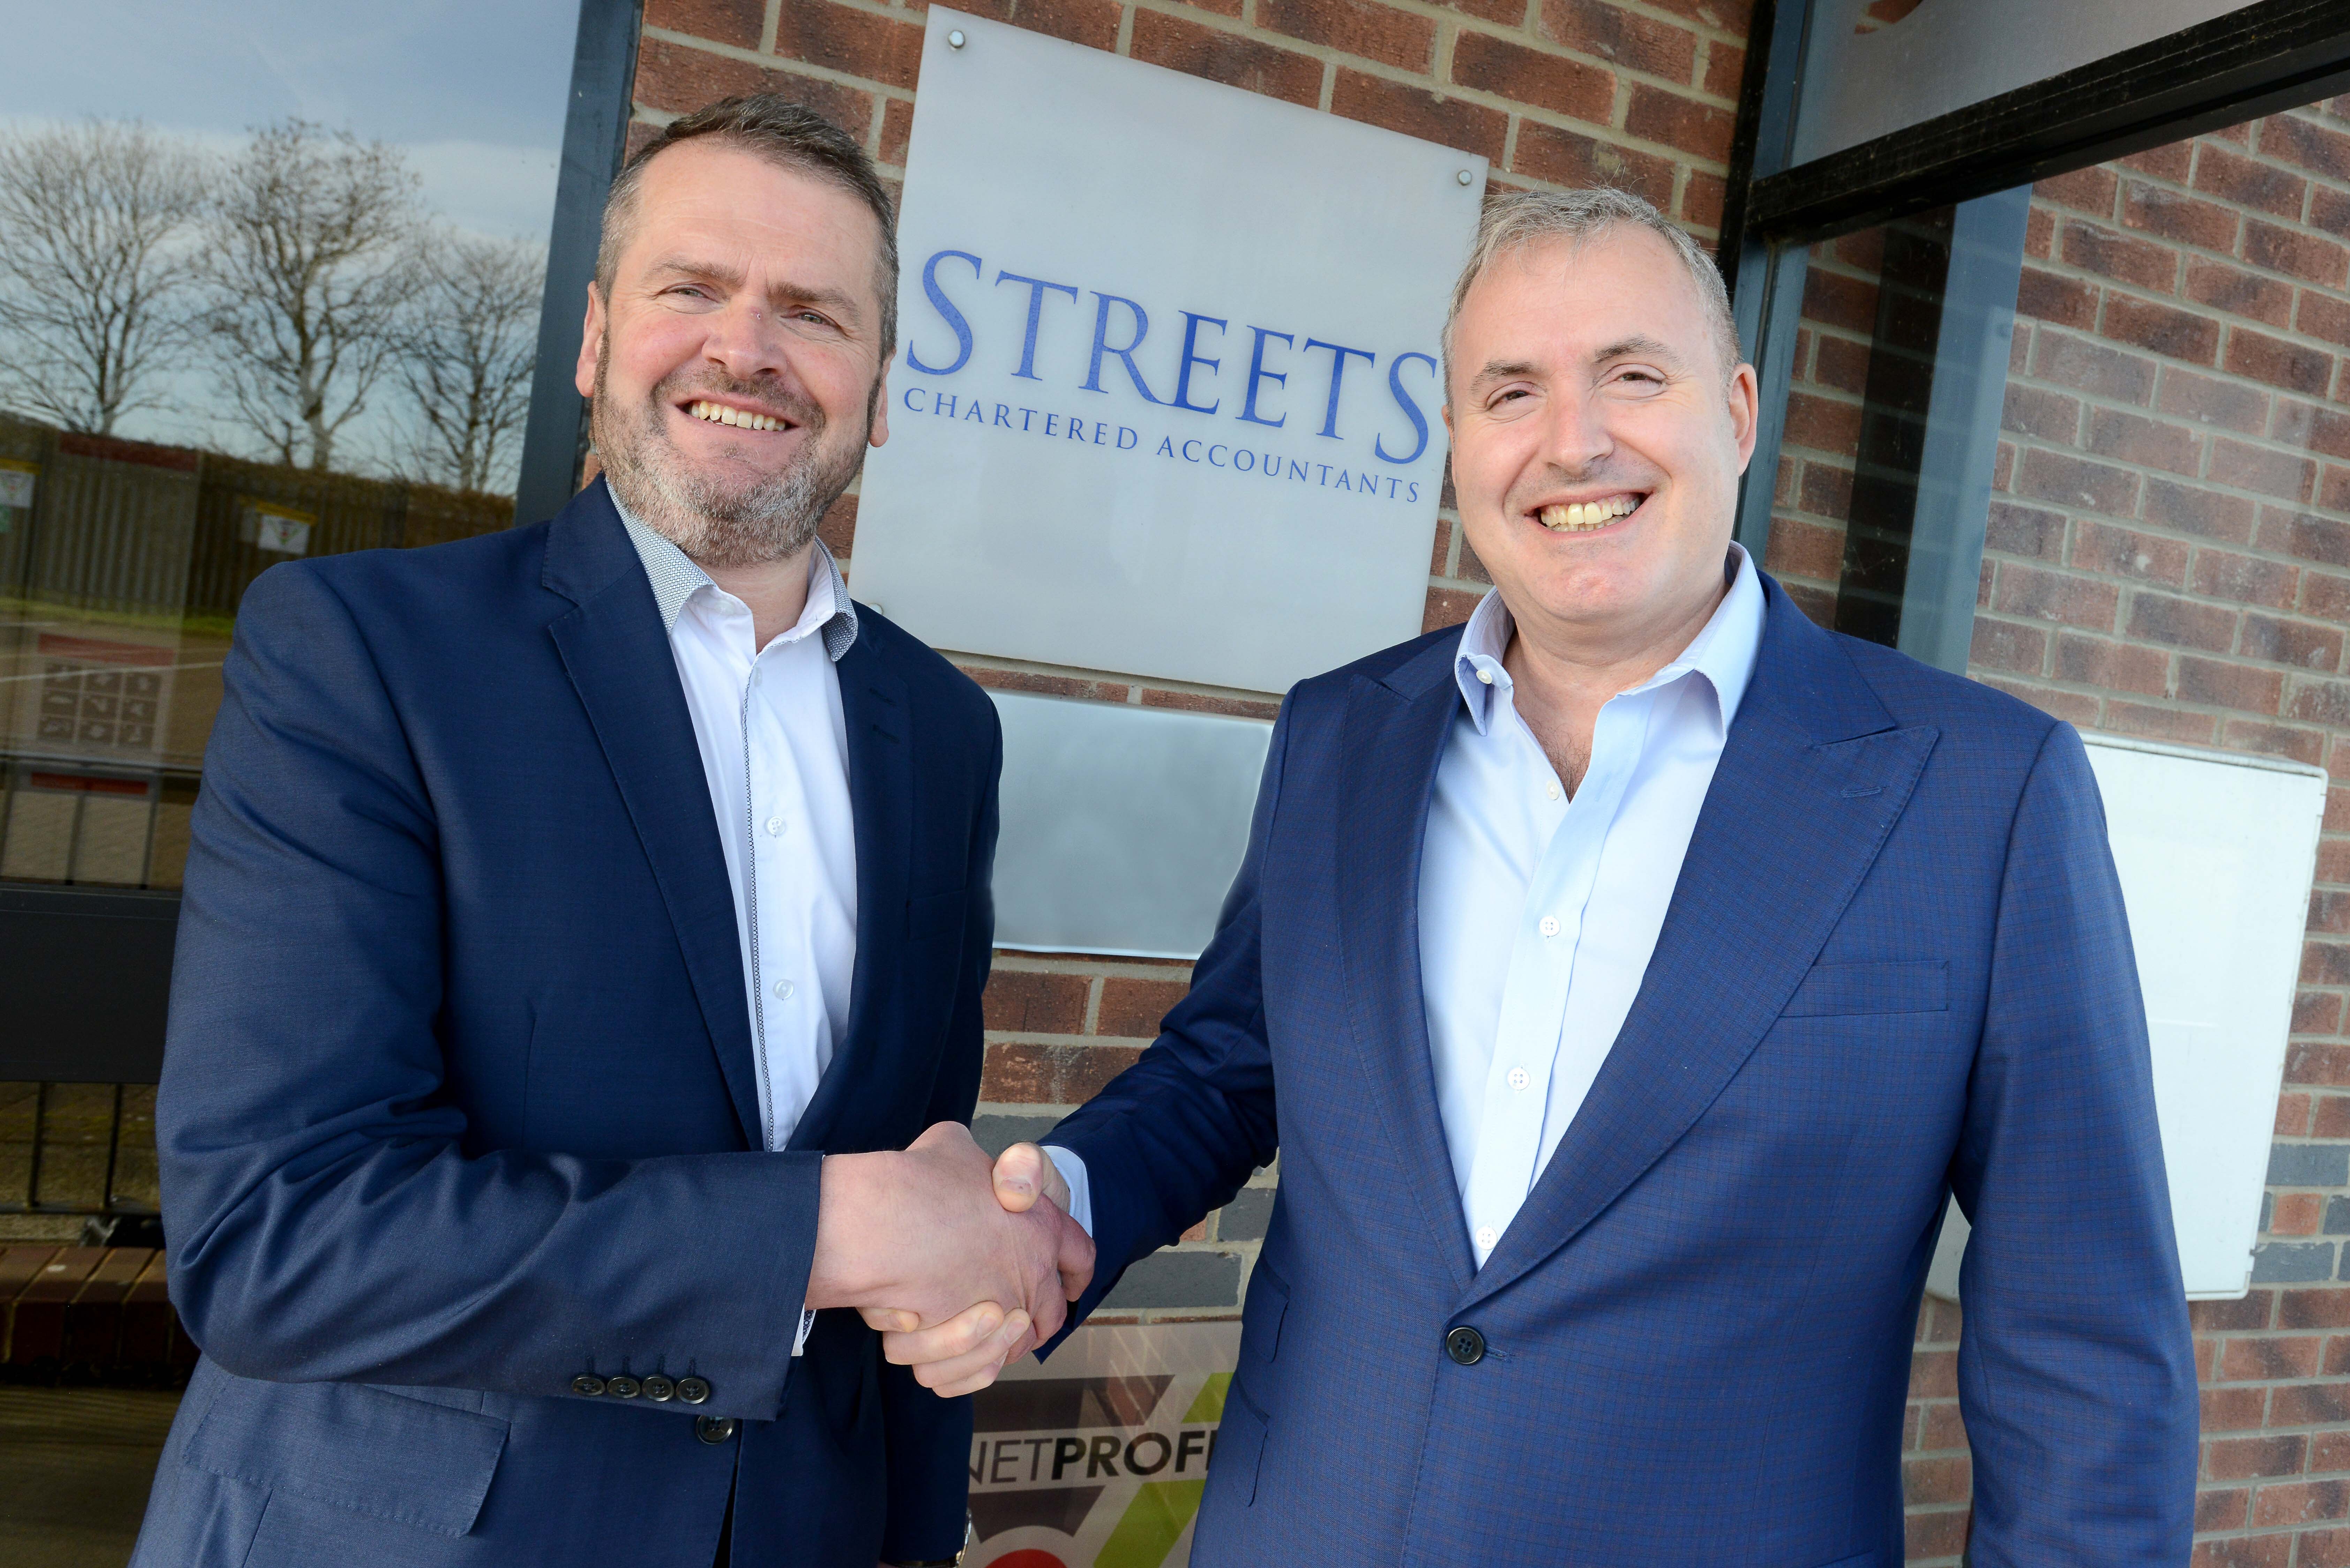 Image to represent Streets appoint Martyn Shakespear as Head of Banking & Finance